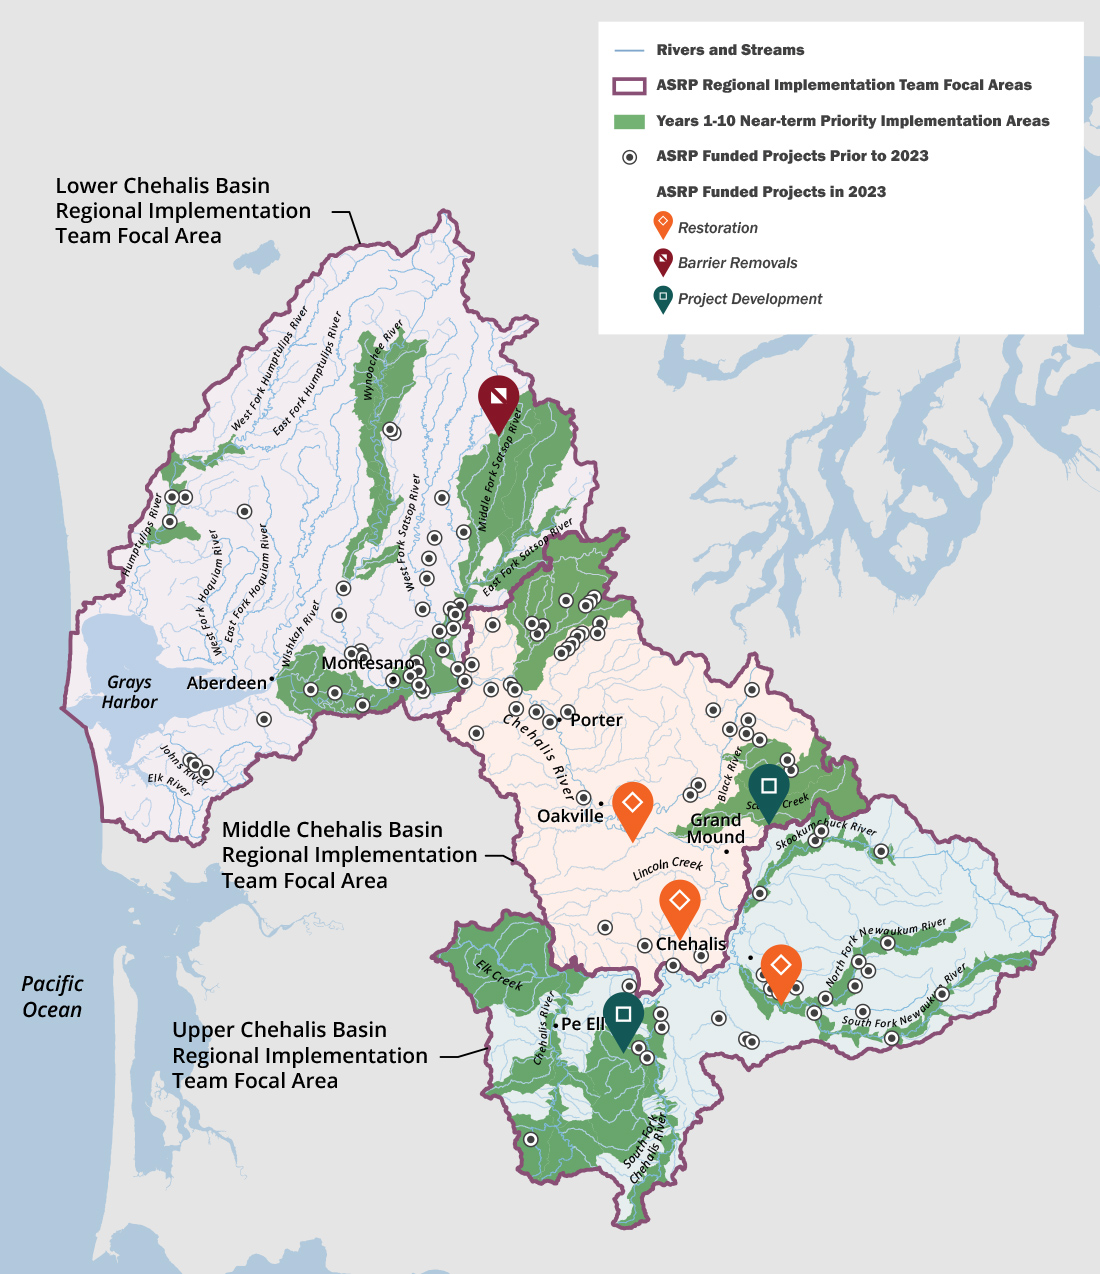 Map showing ASRP projects across the Chehalis Basin. Projects implemented prior to 2023 are shown as circles on the map. Seven projects were initiated in 2023 shown with symbols that represent the project types. 2023 projects included the following: three restoration projects on the mainstem Chehalis River, Mill Creek, and Newaukum Rivers; one barrier removal project in Dry Bed Creek in the Satsop Sub-basin; and one project development awards given for early project strategy work for the Scatter Creek and South fork Chehalis River water rights project. The map shows the three regional implementation team focal areas for the Lower, Middle and Upper Chehalis Basin. The map also highlights the smaller near-term priority implementation areas for focus in years 1 through 10 within the overall basin.